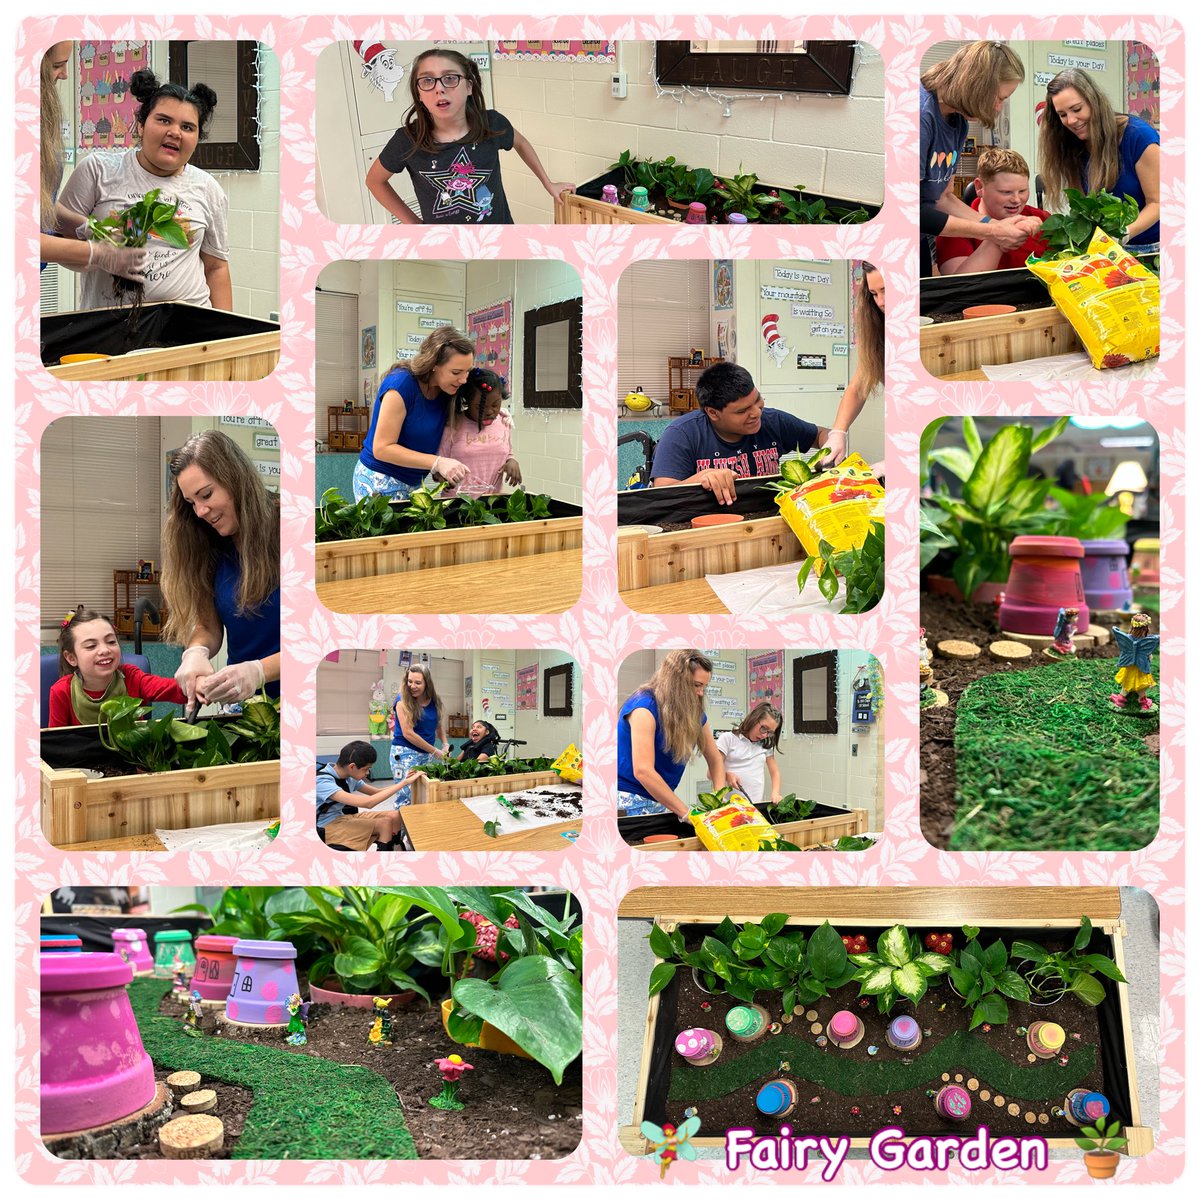 We have started our gardening unit a little early by creating a fairy garden! Such a fun spring project! @oms_bulldogs @collierschools